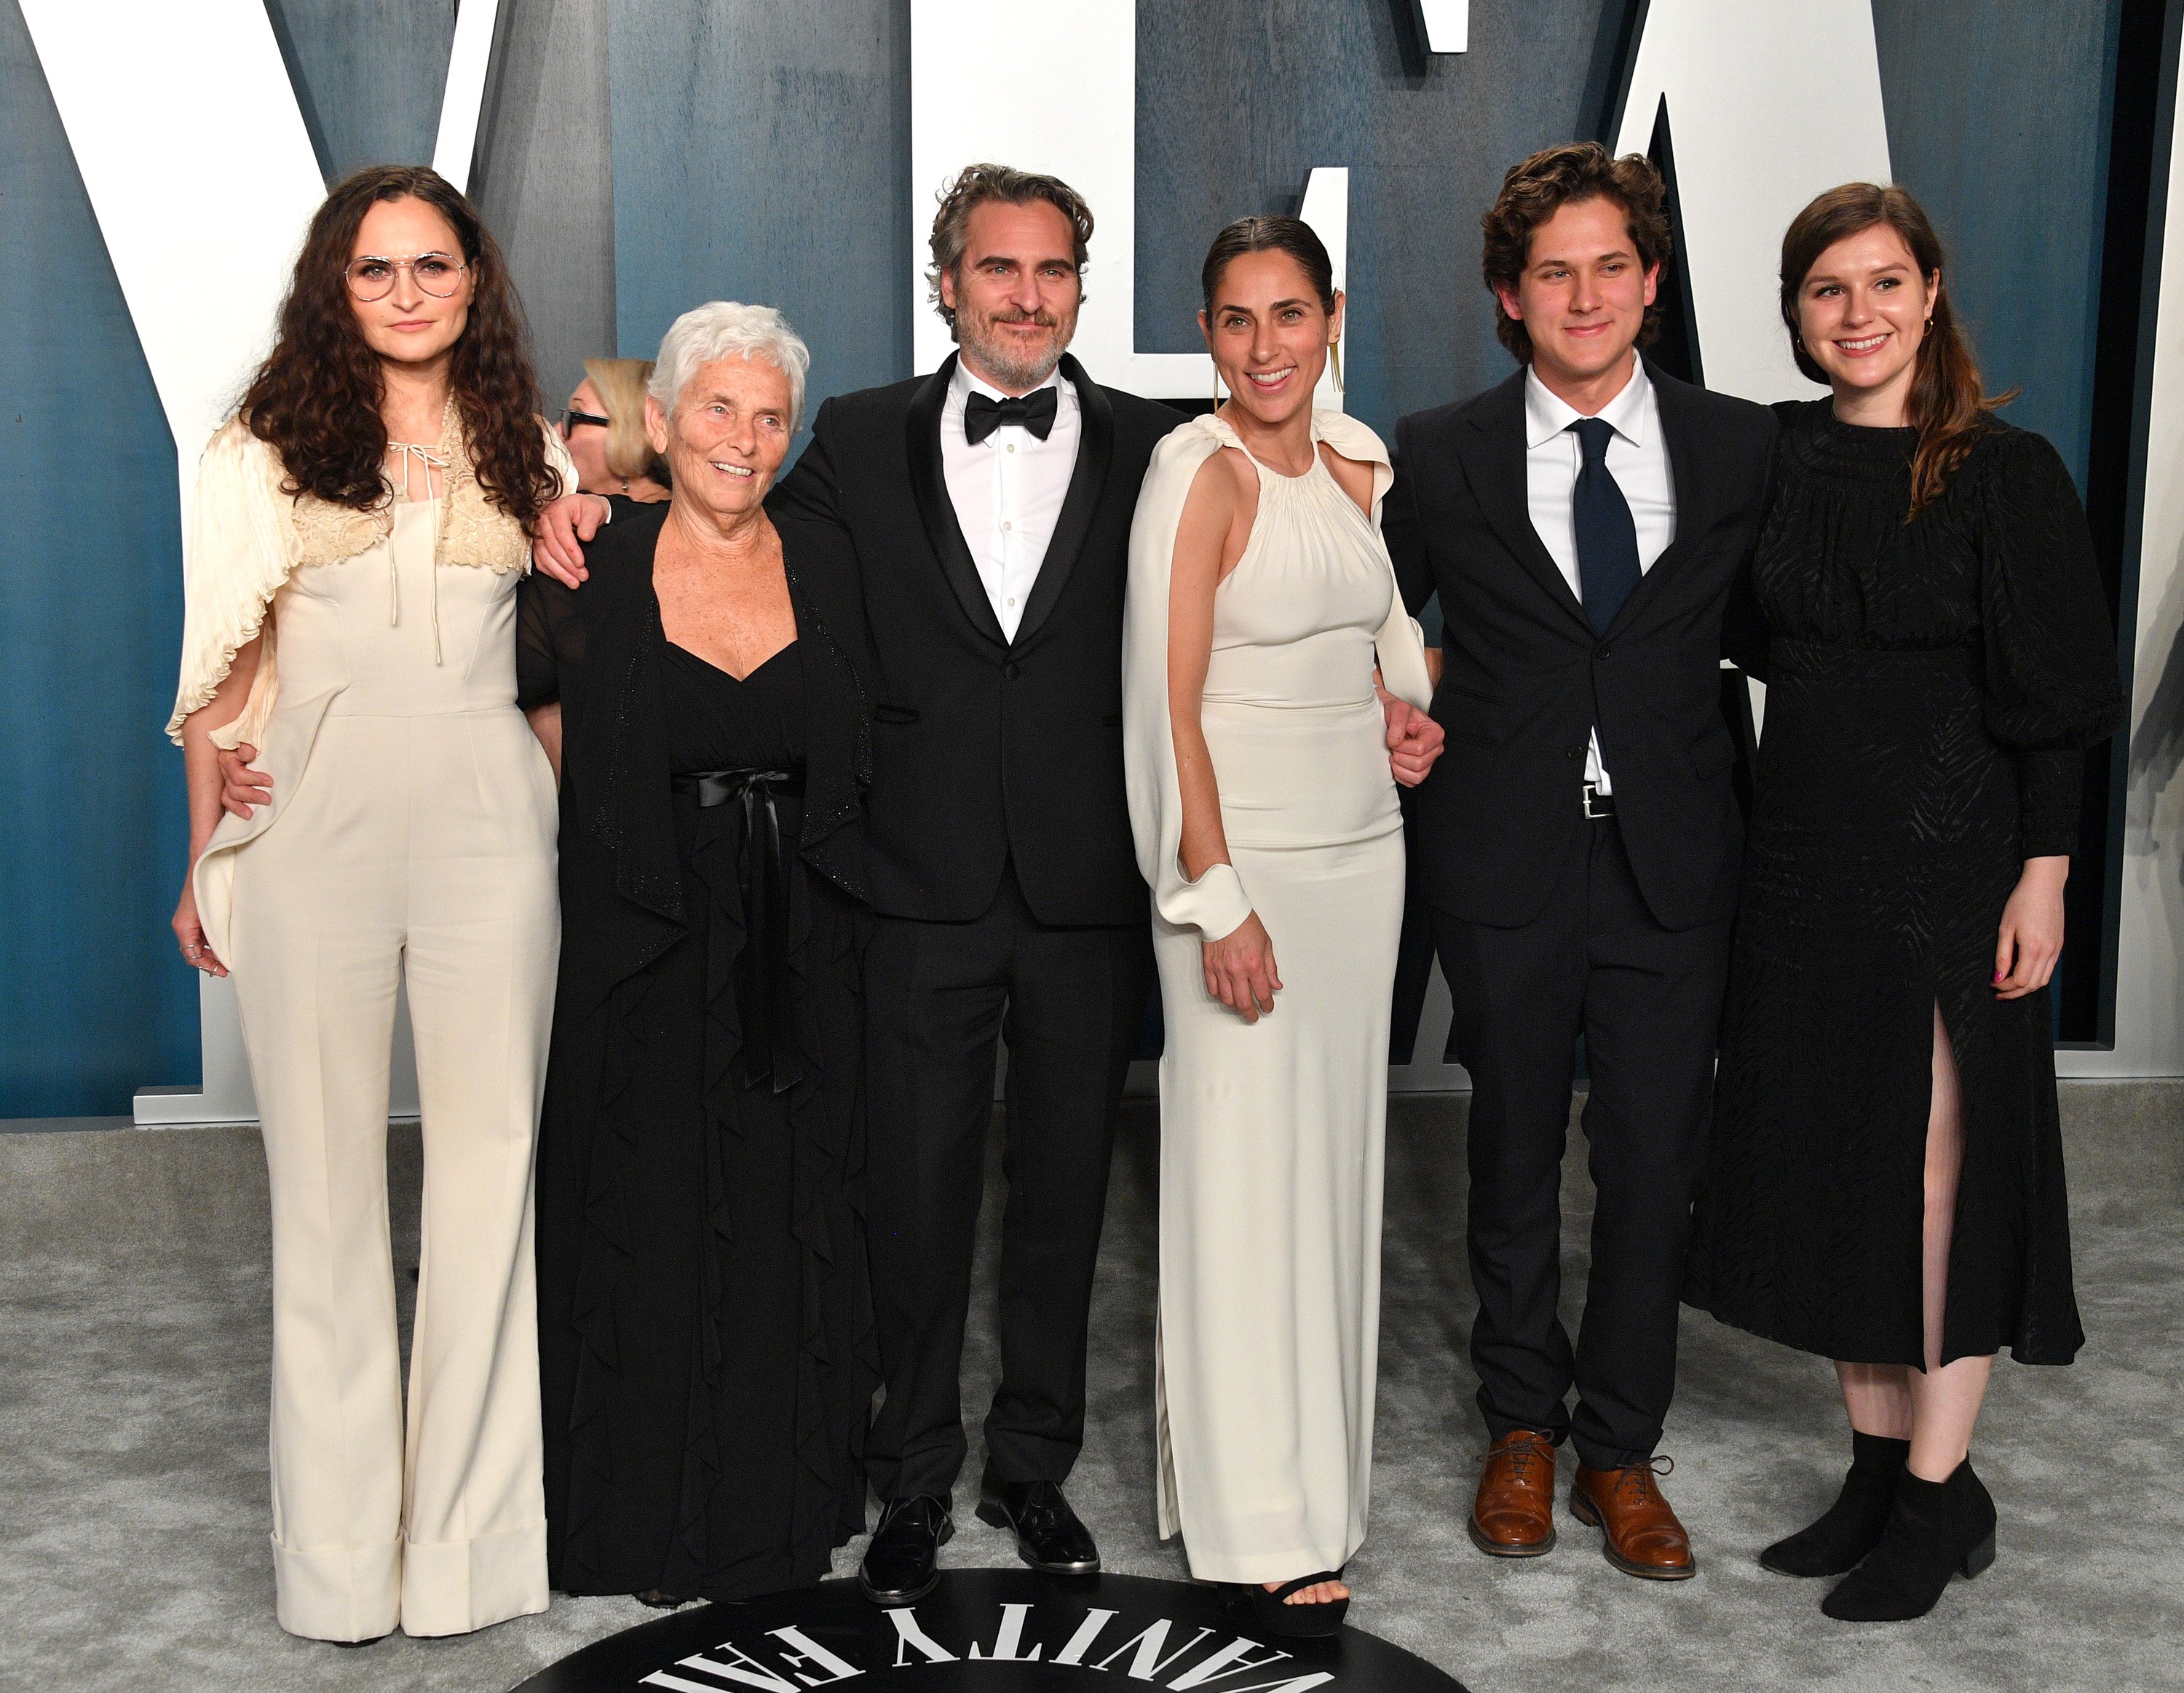 Rain Phoenix, Arlyn Phoenix, Joaquin Phoenix, Summer Phoenix and guests attend the 2020 Vanity Fair Oscar party at Wallis Annenberg Center for the Performing Arts on February 09, 2020, in Beverly Hills, California. | Source: Getty Images